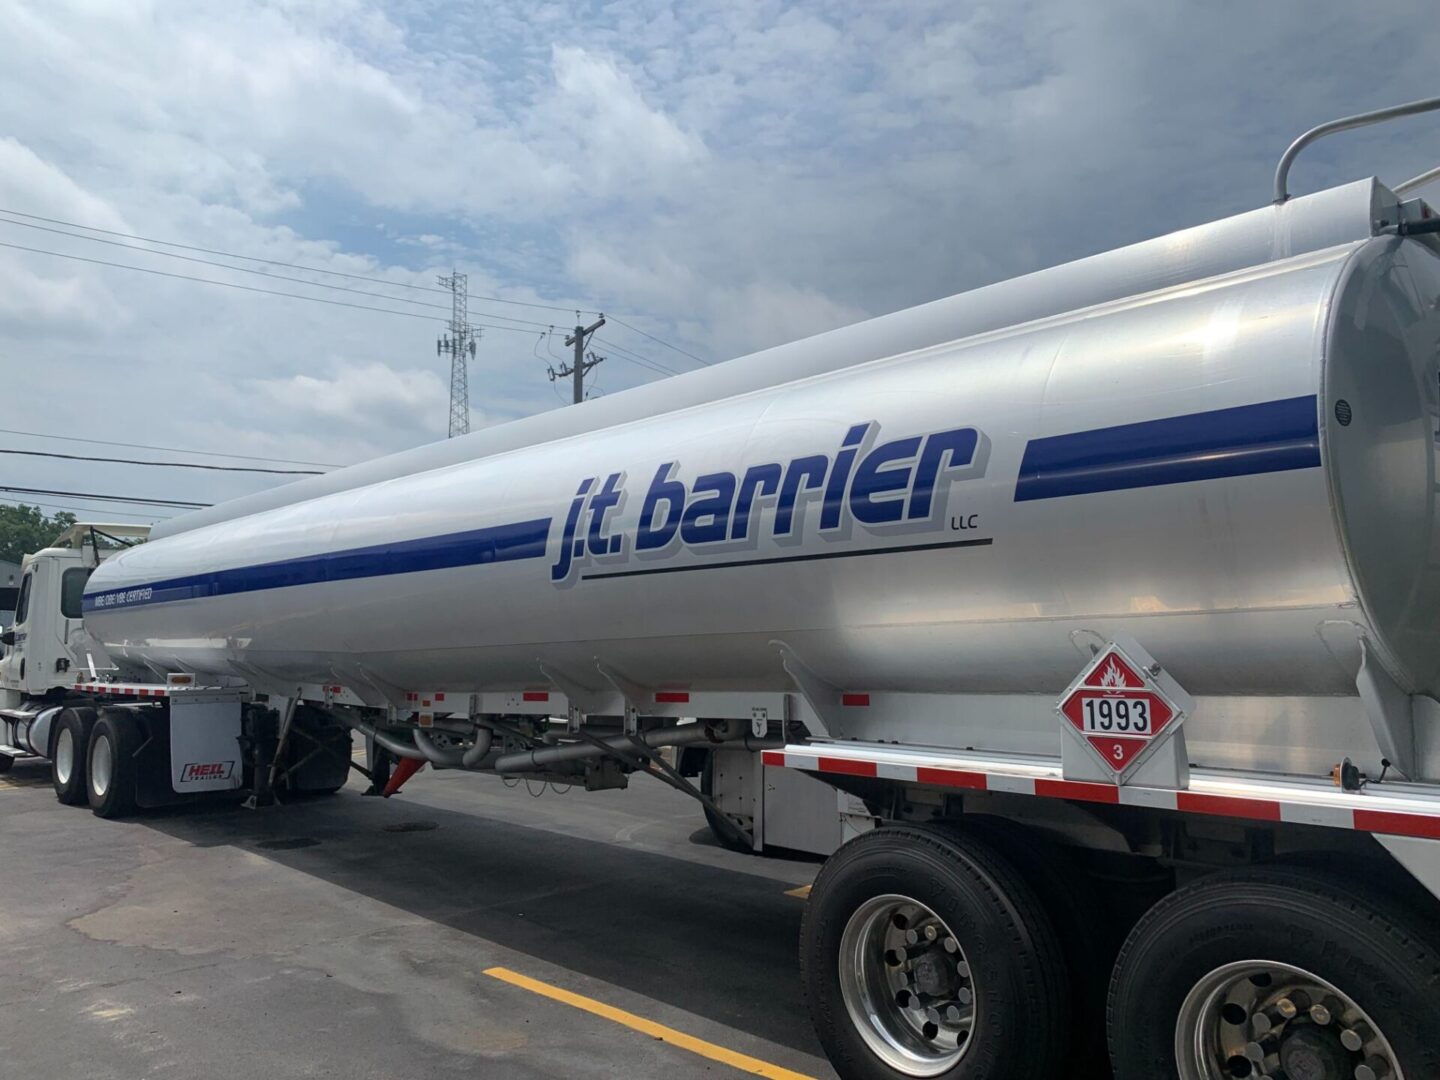 A white and blue tanker truck parked in a parking lot.